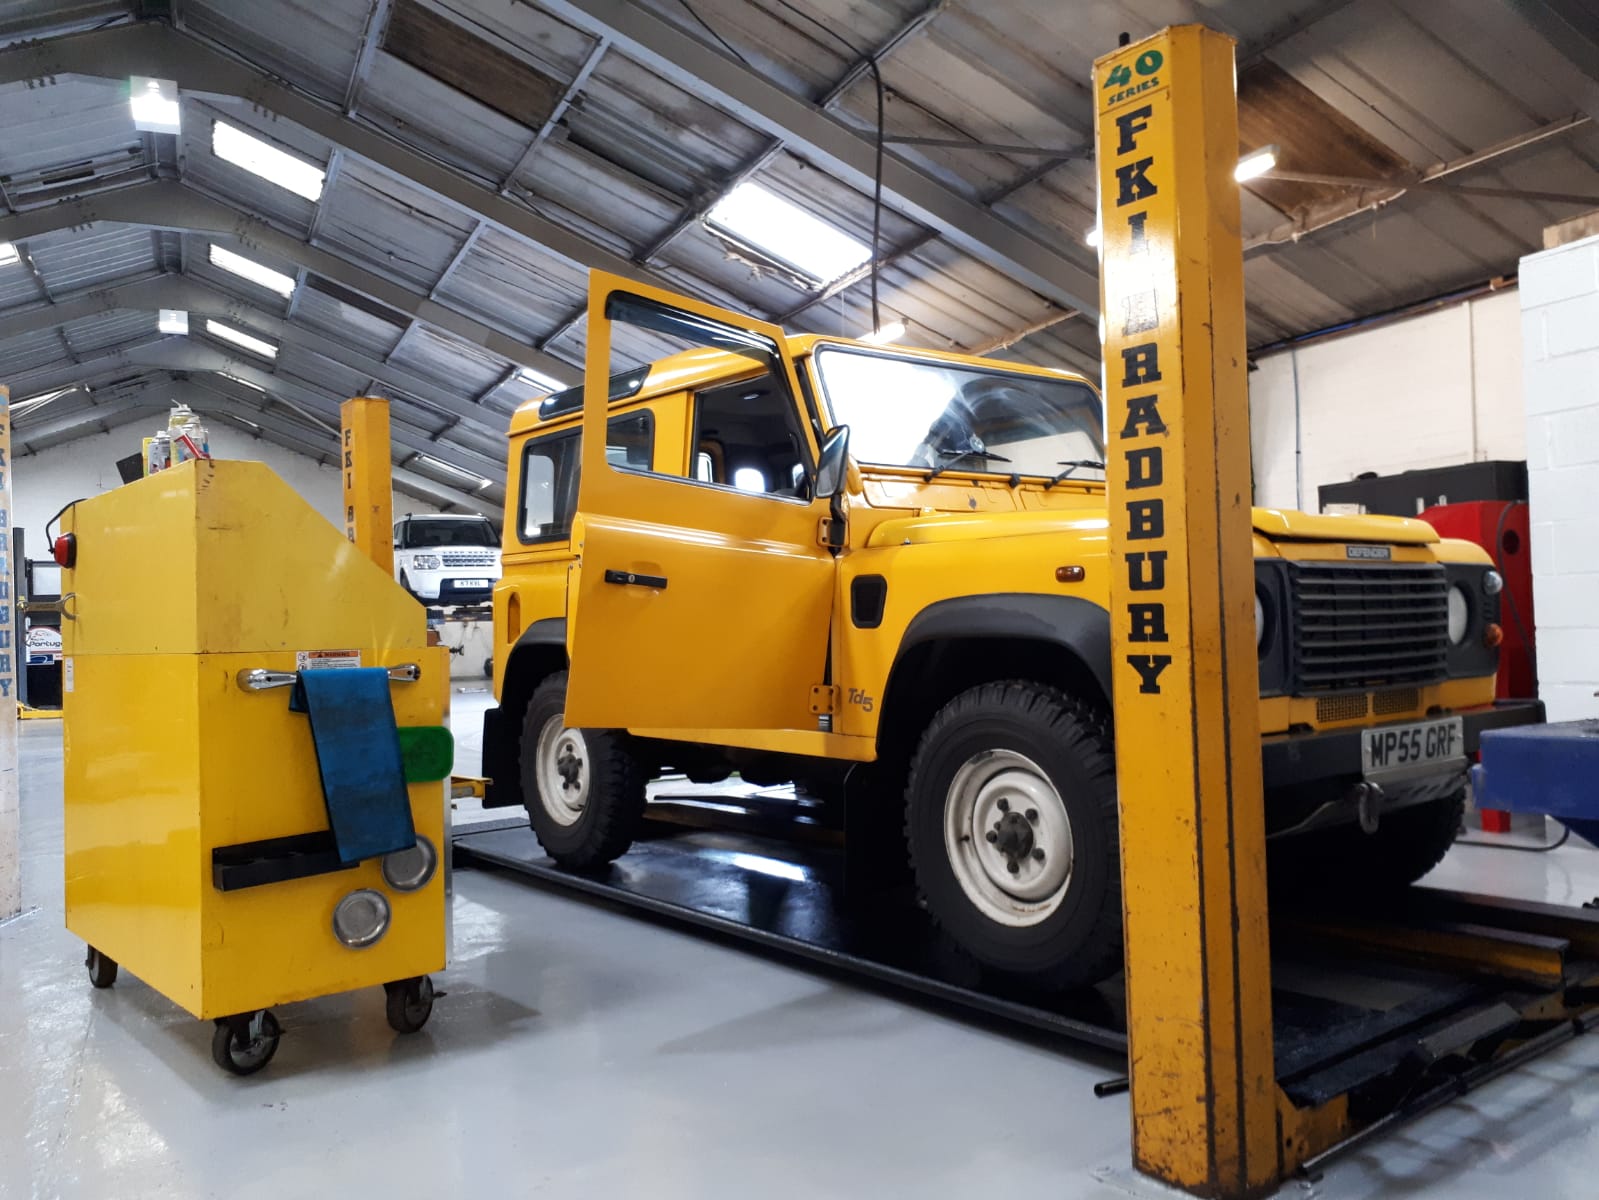 Land Rover Defenders in the Gibsons Auto Services workshop in Cumnock Ayrshire